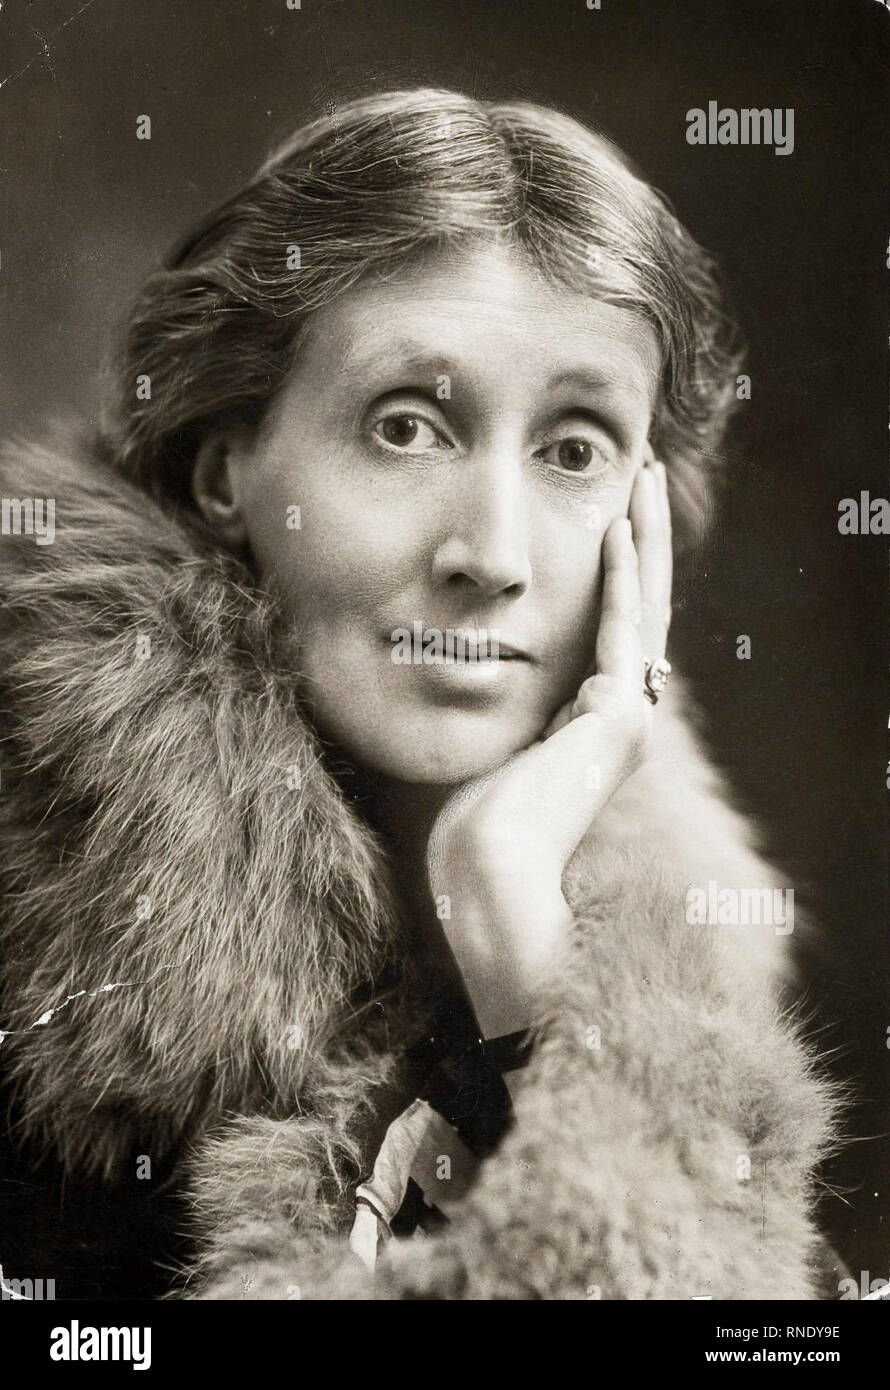 Virginia Woolf (1882-1941), portrait by unknown photographer, photograph, 1927 Stock Photo